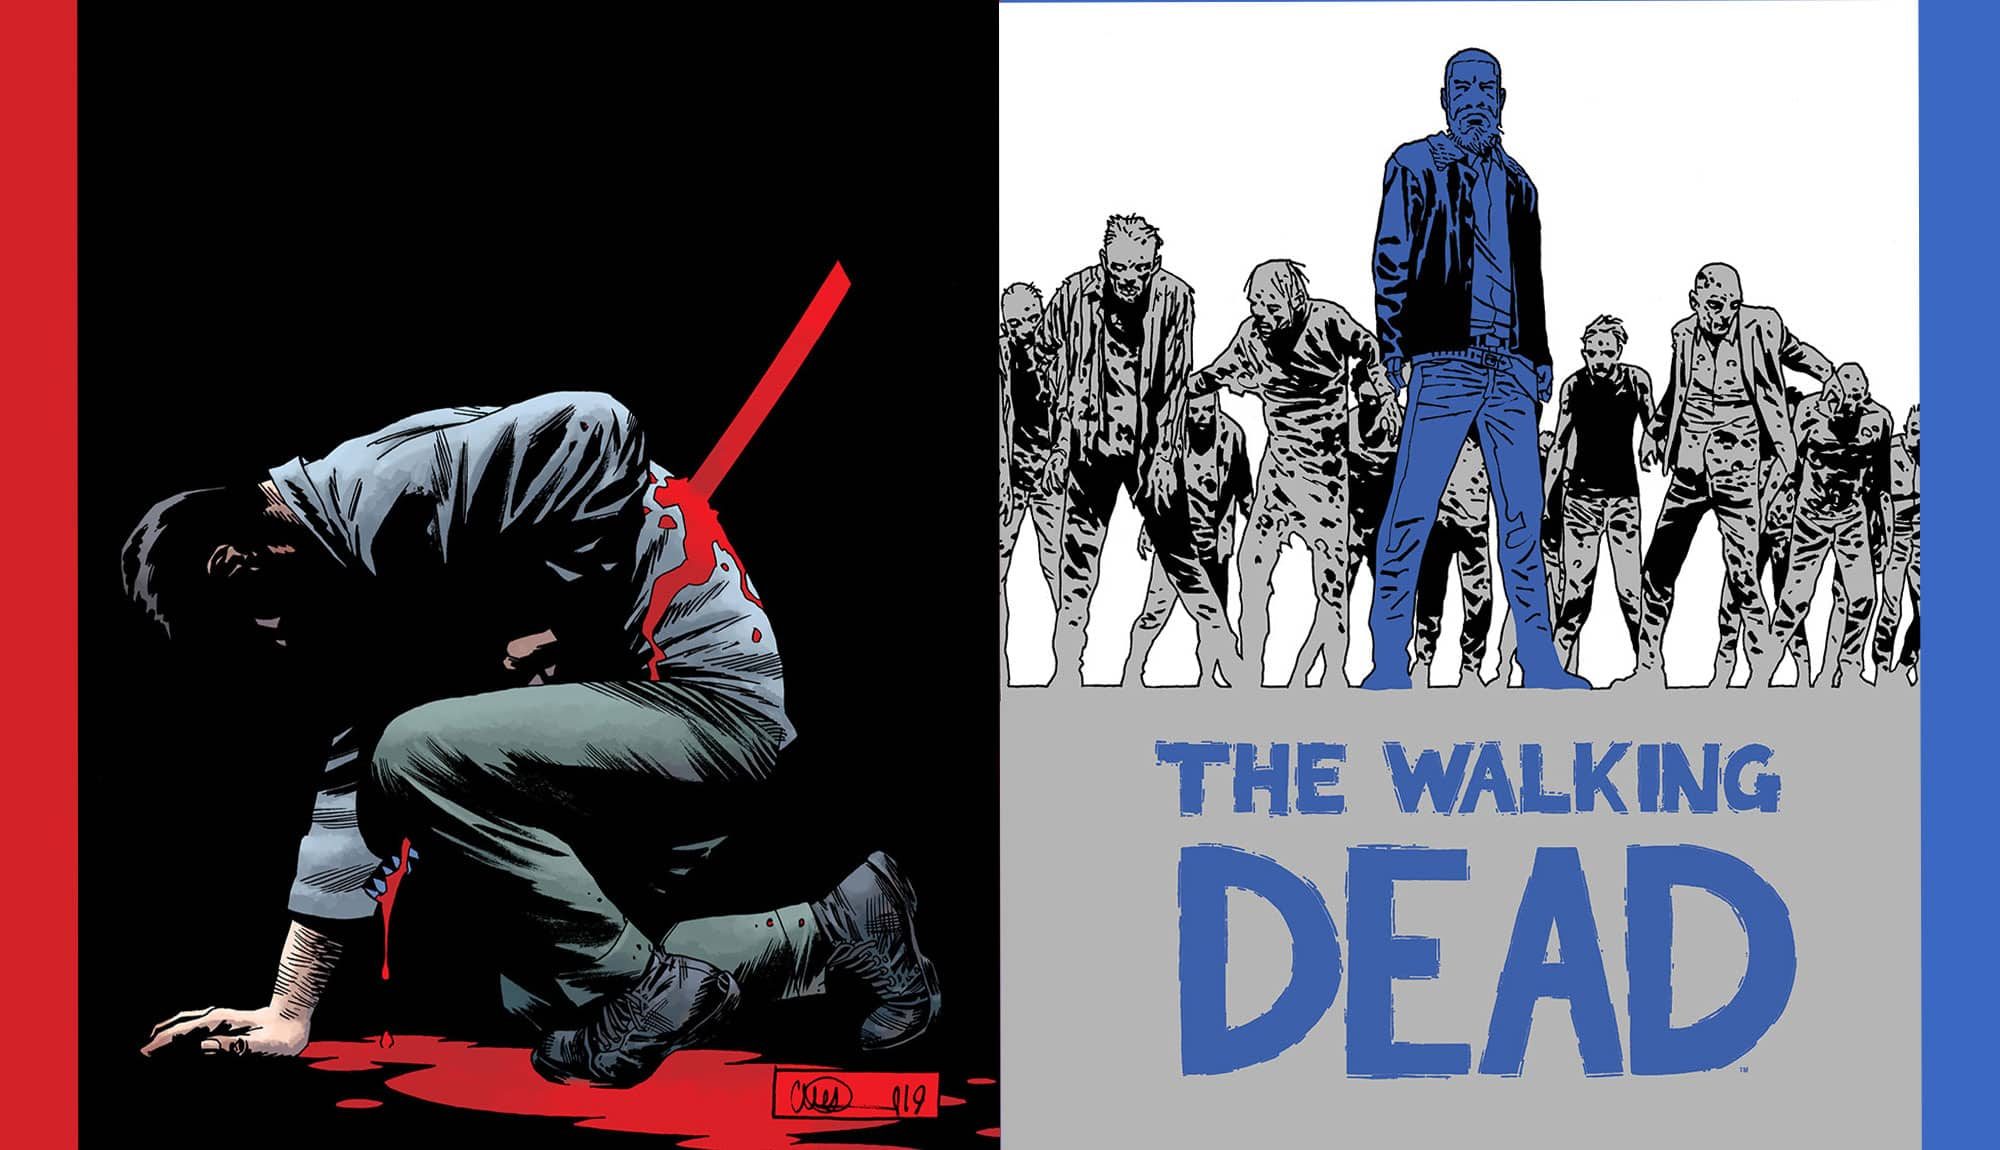 The Walking Dead Issue 195 & Hardcover Book 16 Covers Revealed